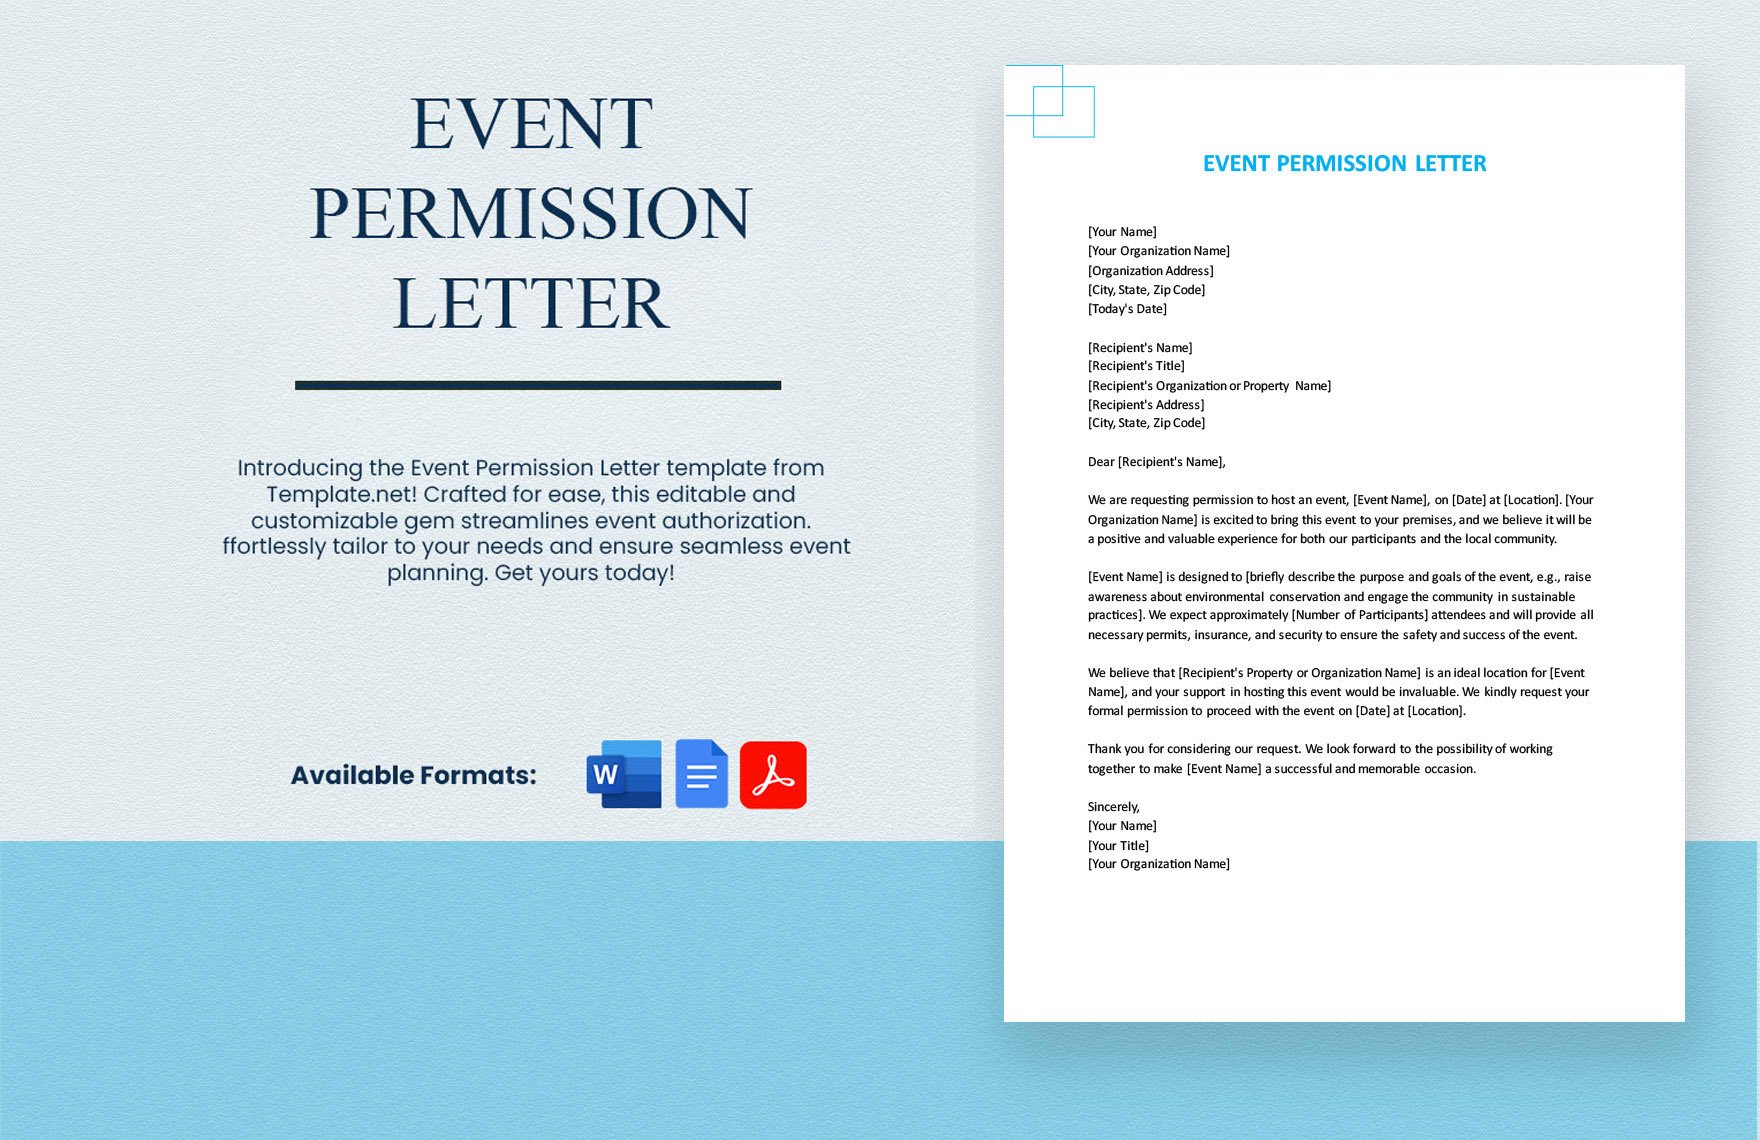 Event Permission Letter in Word, Google Docs, PDF